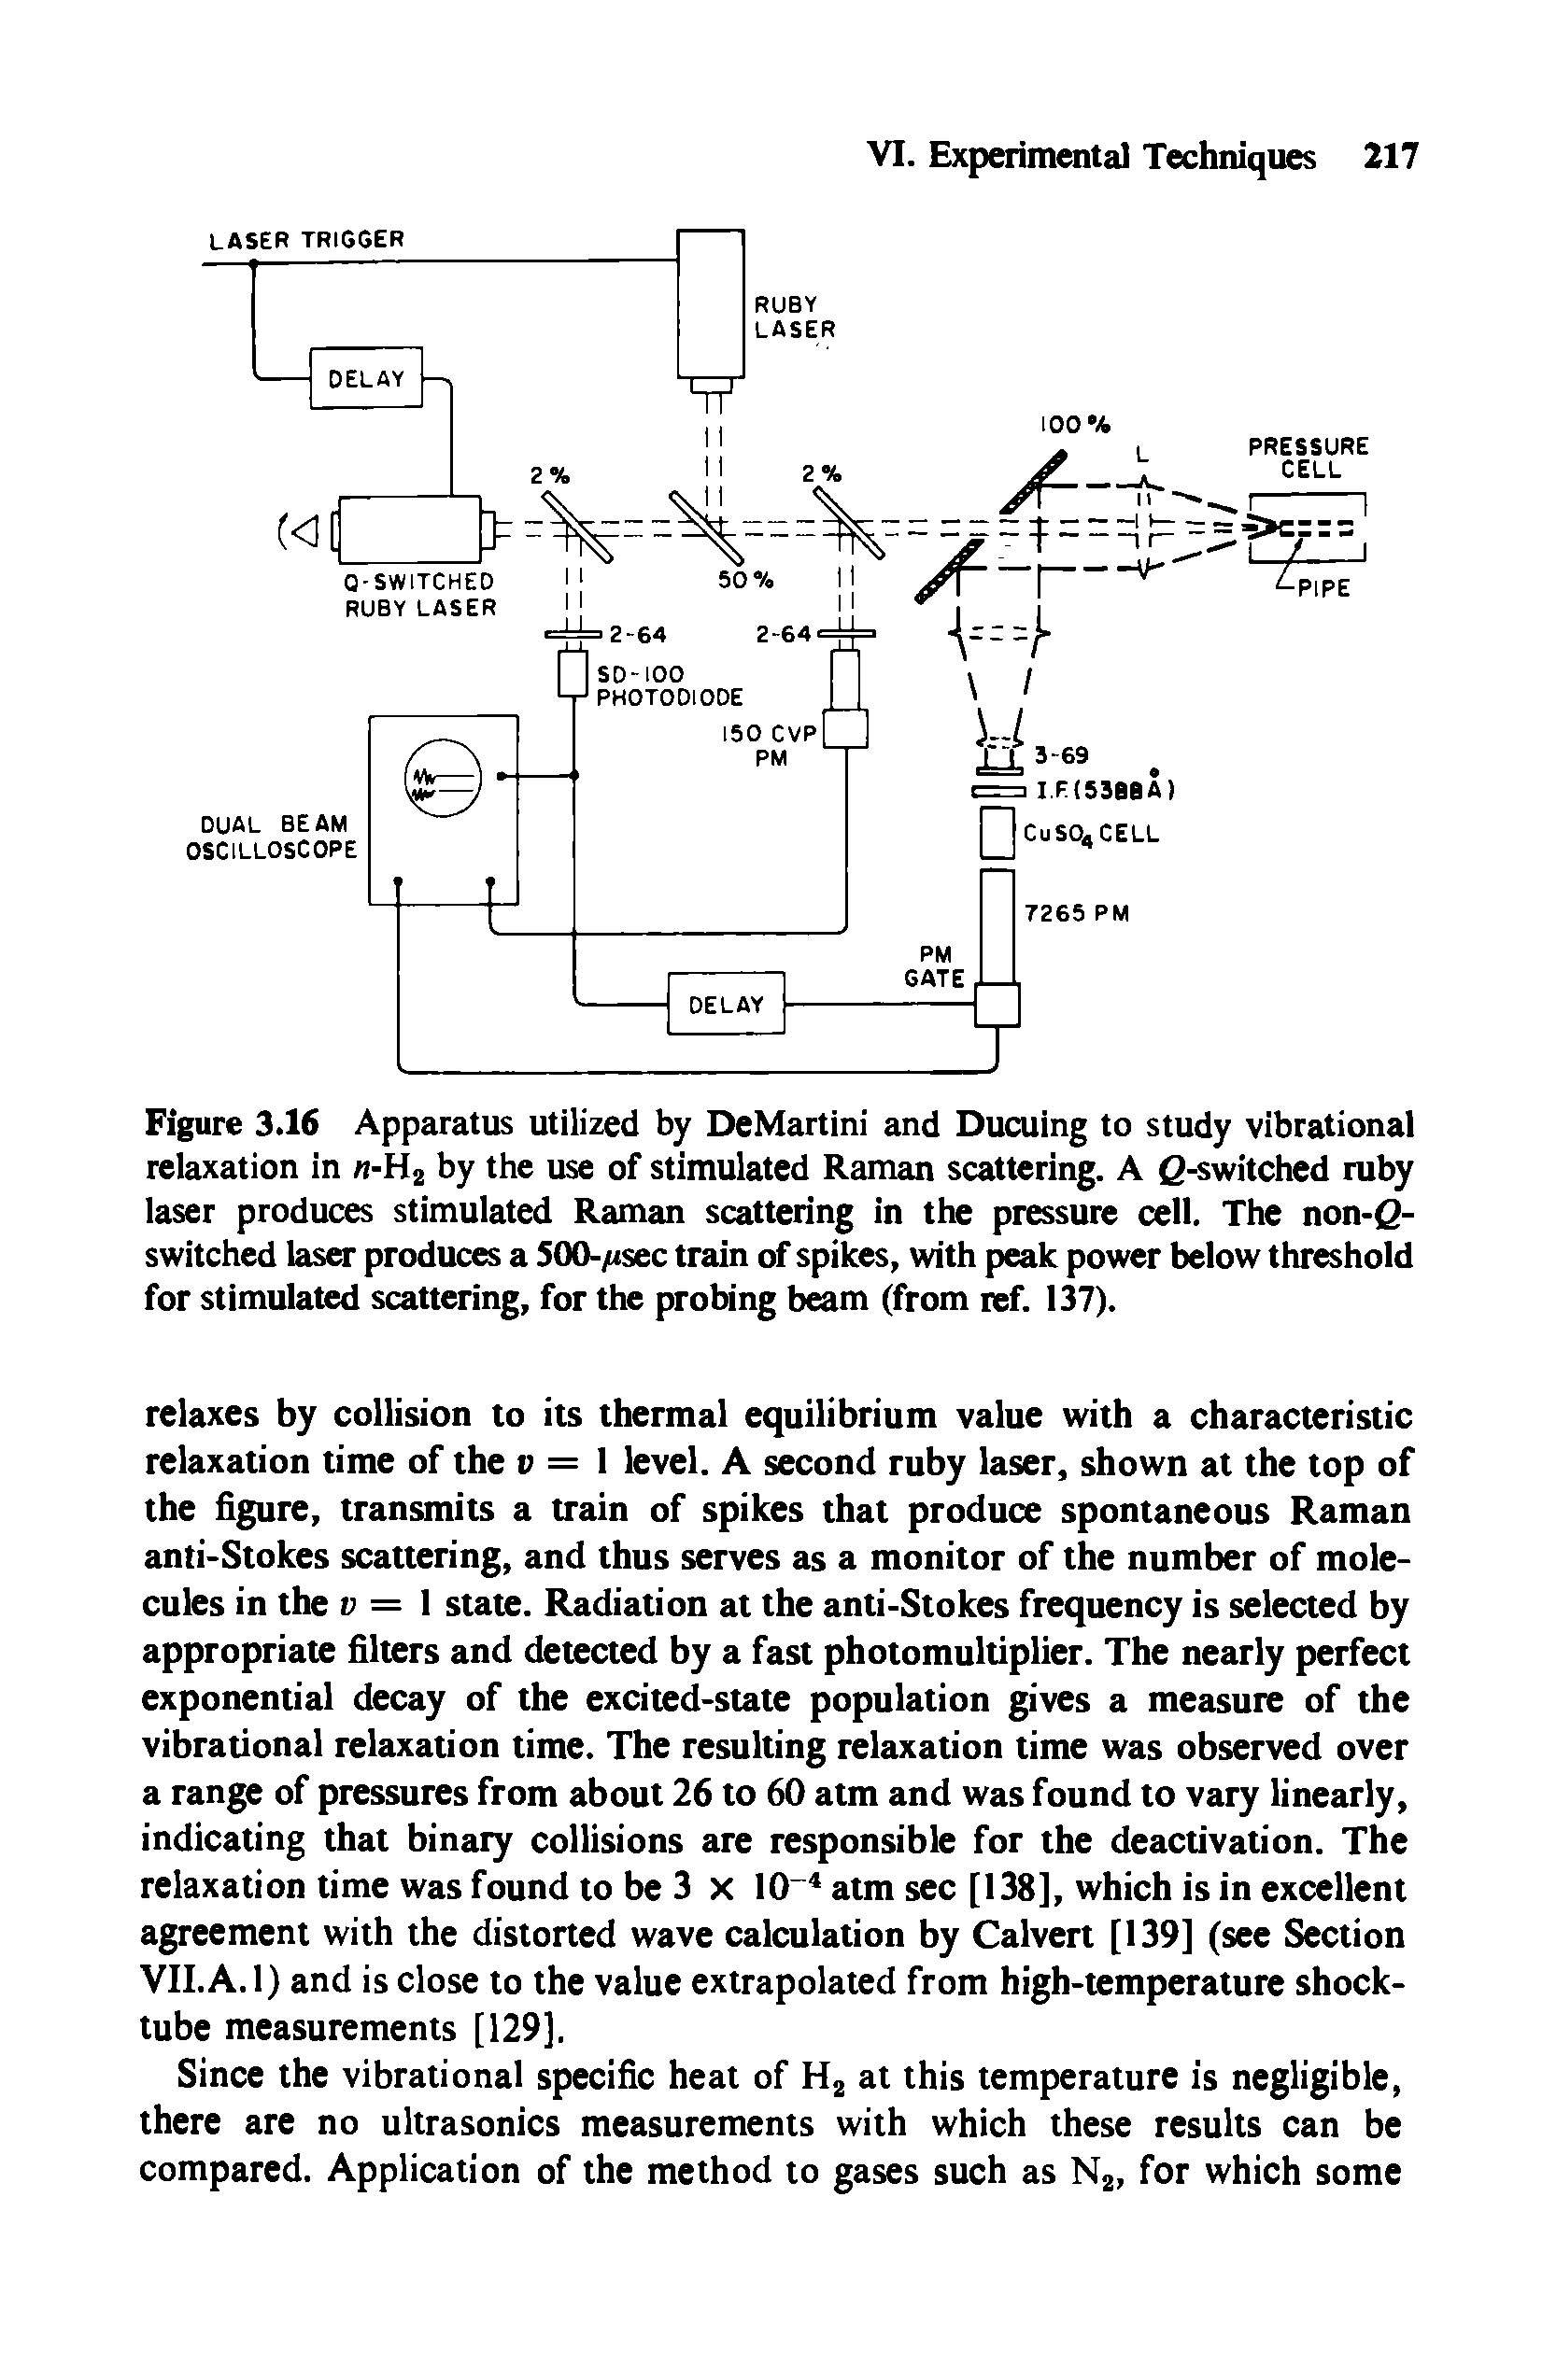 Figure 3.16 Apparatus utilized by DeMartini and Ducuing to study vibrational relaxation in n-H2 by the use of stimulated Raman scattering. A g-switched ruby laser produces stimulated Raman scattering in the pressure cell. The non-g-switched laser produces a 500-yusec train of spikes, with peak power below threshold for stimulated scattering, for the probing beam (from ref. 137).